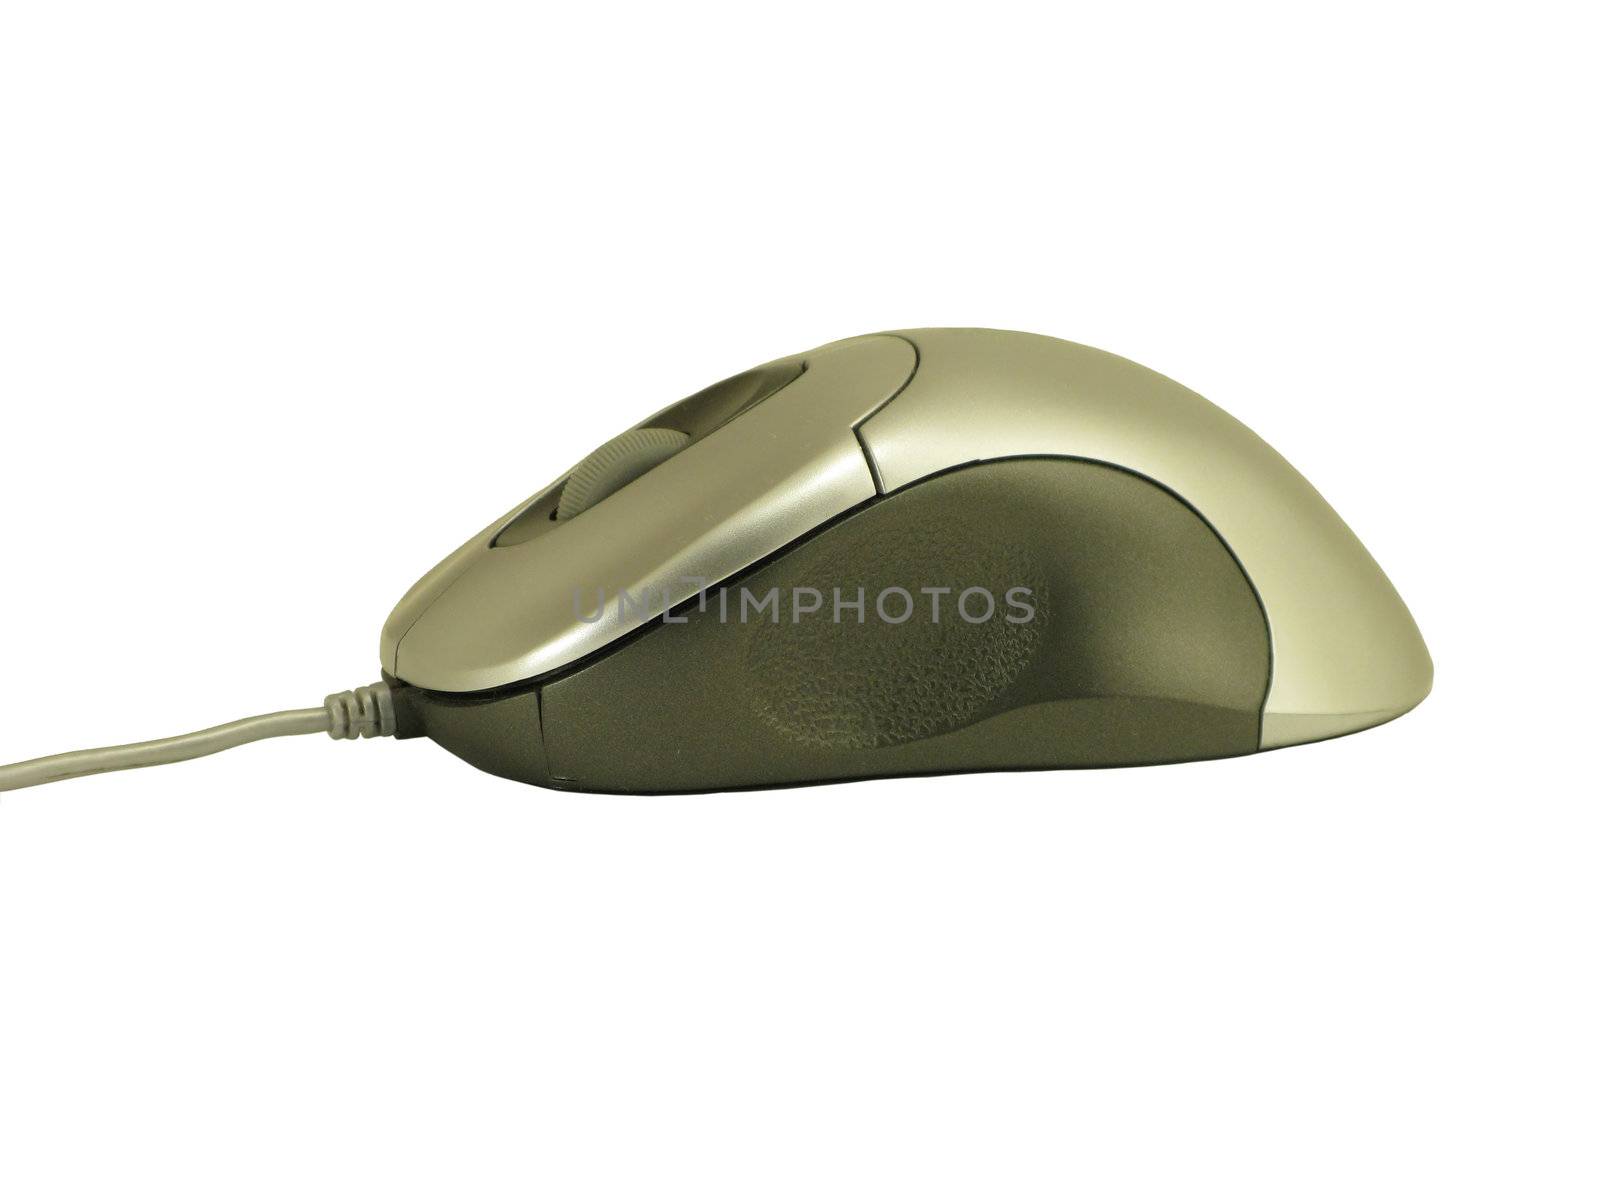 Computer mouse on a white background by wander